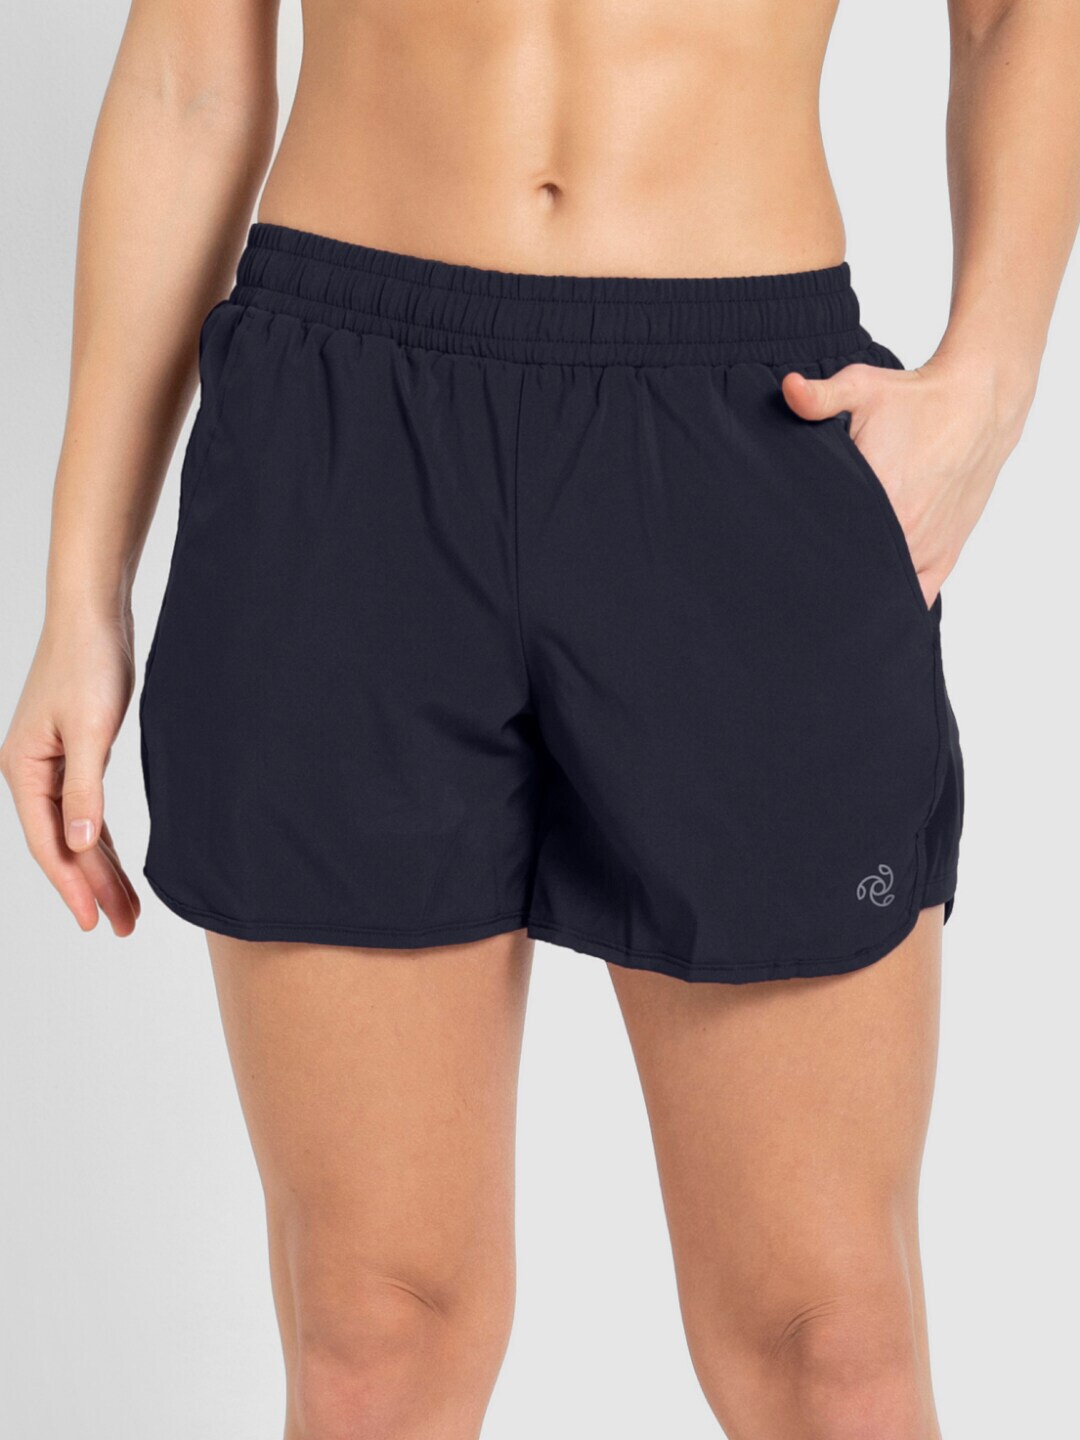 Jockey Women Navy Blue Solid Lounge Shorts Price in India